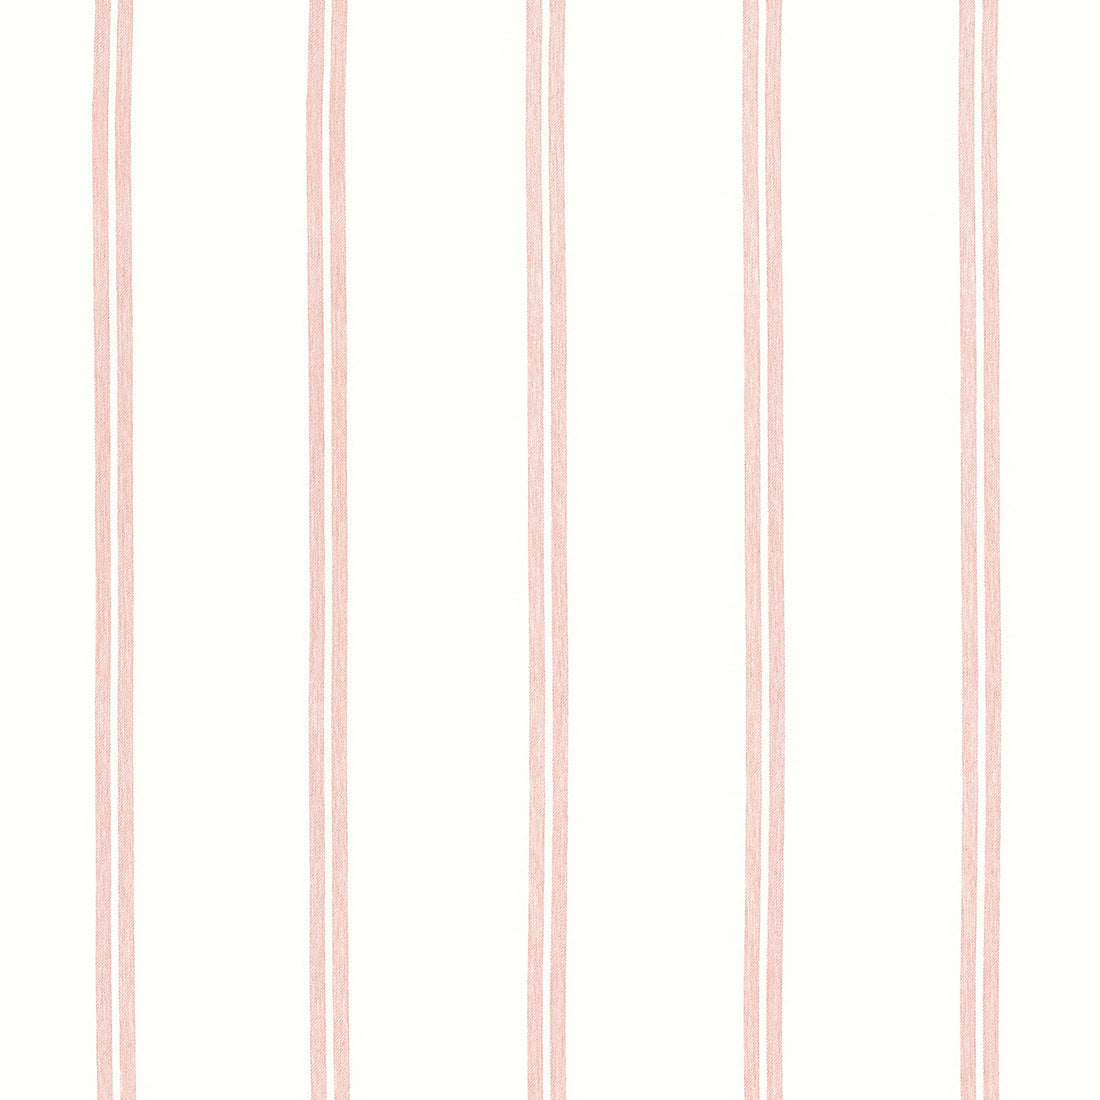 Tandern Stripe fabric in blush color - pattern number FWW81747 - by Thibaut in the Locale Wide Width collection